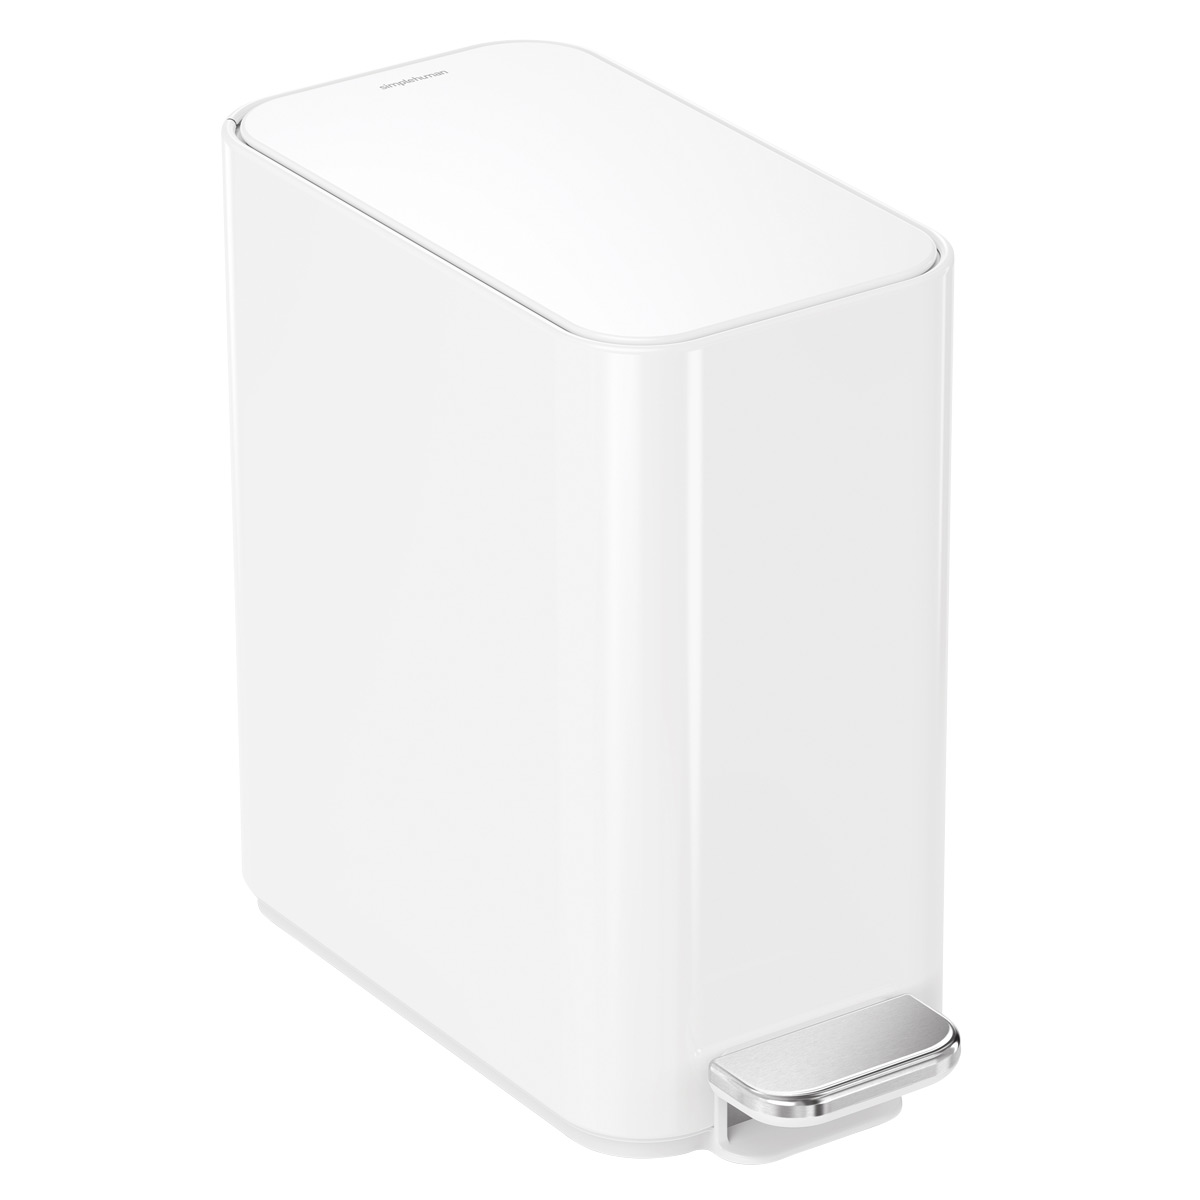 https://www.containerstore.com/catalogimages/473516/10091731-sh-slim-can-white-ven1.jpg